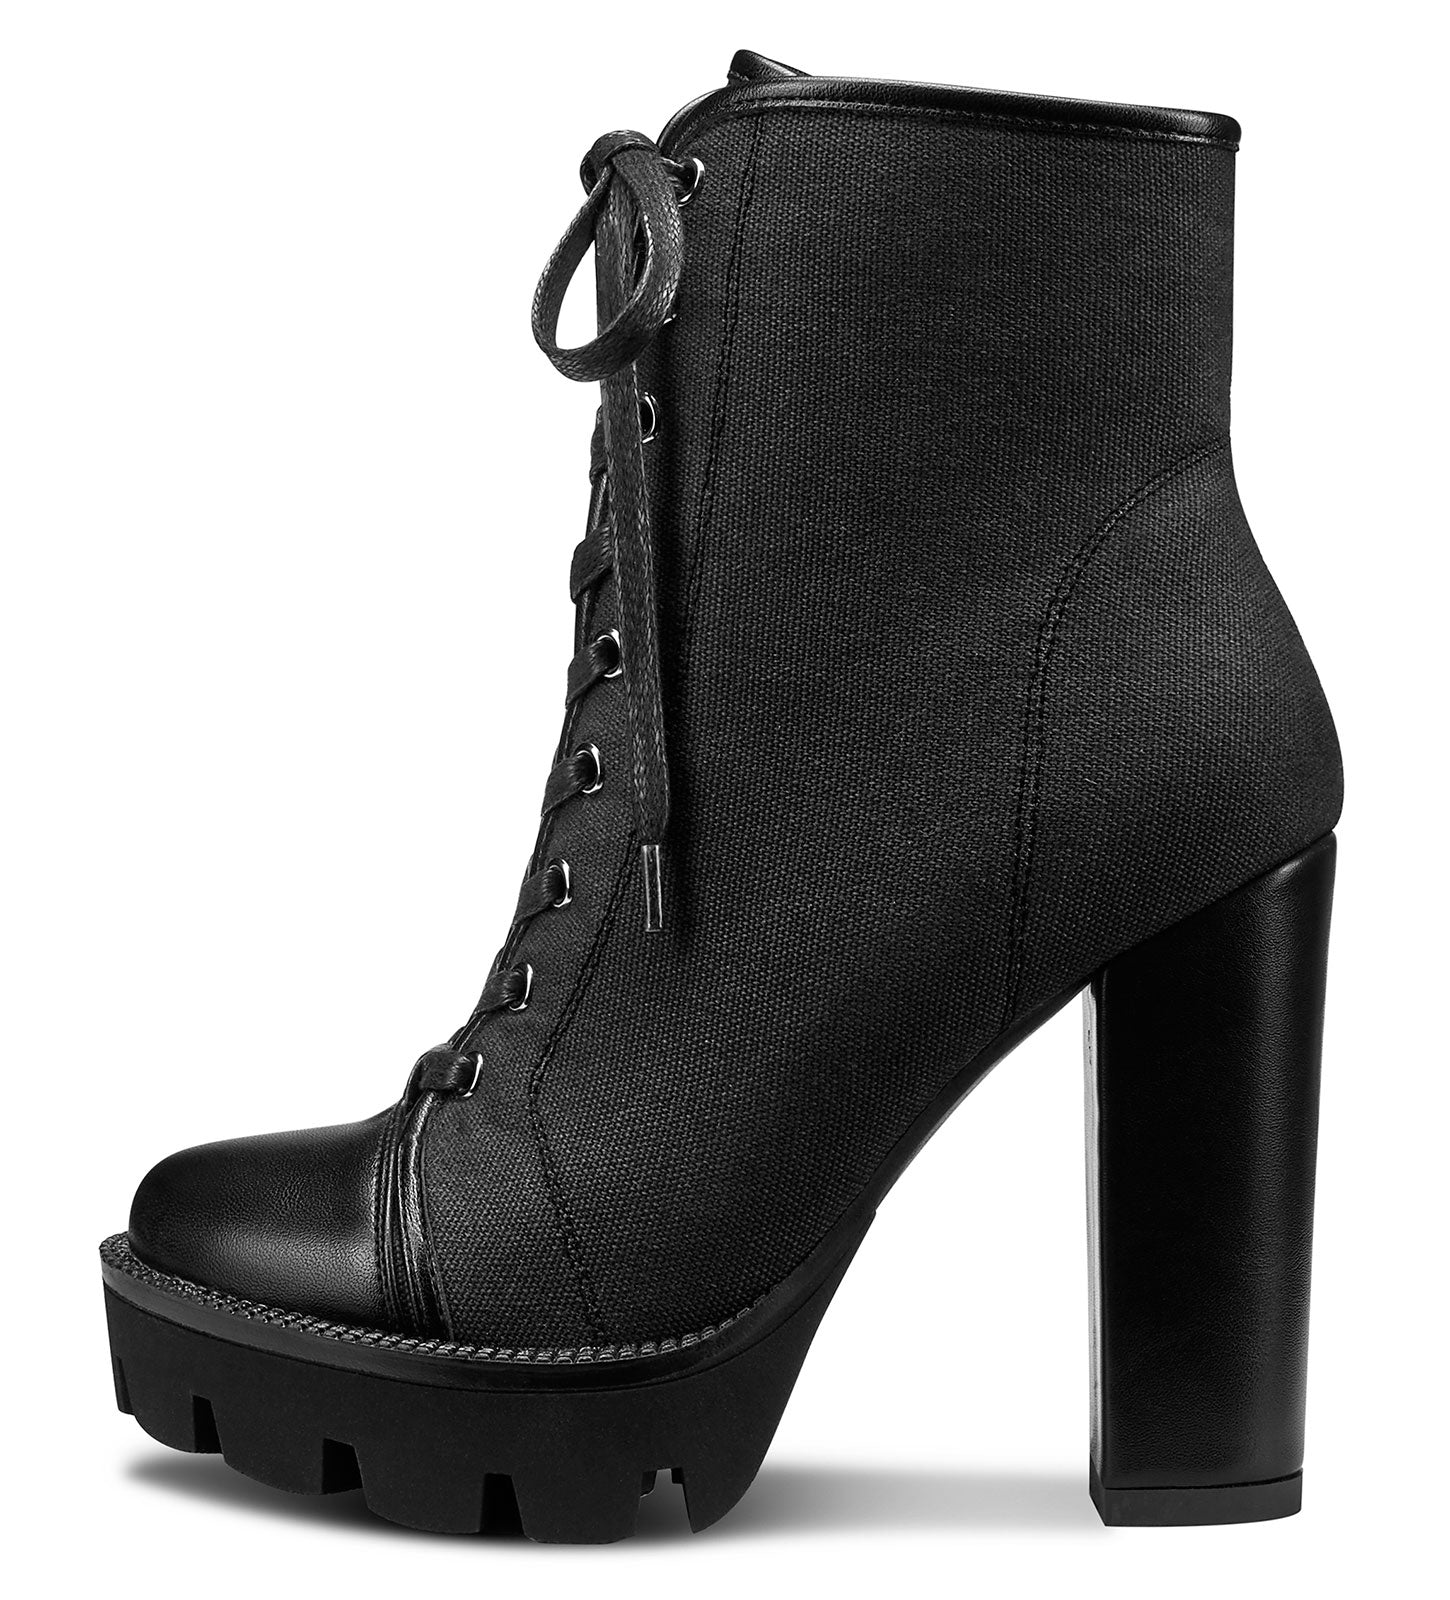 CASTAMERE Womens High Heel Platform Lace Up Booties Chunky Heel Ankle Boots with Zipper Round Toe 12CM Heels